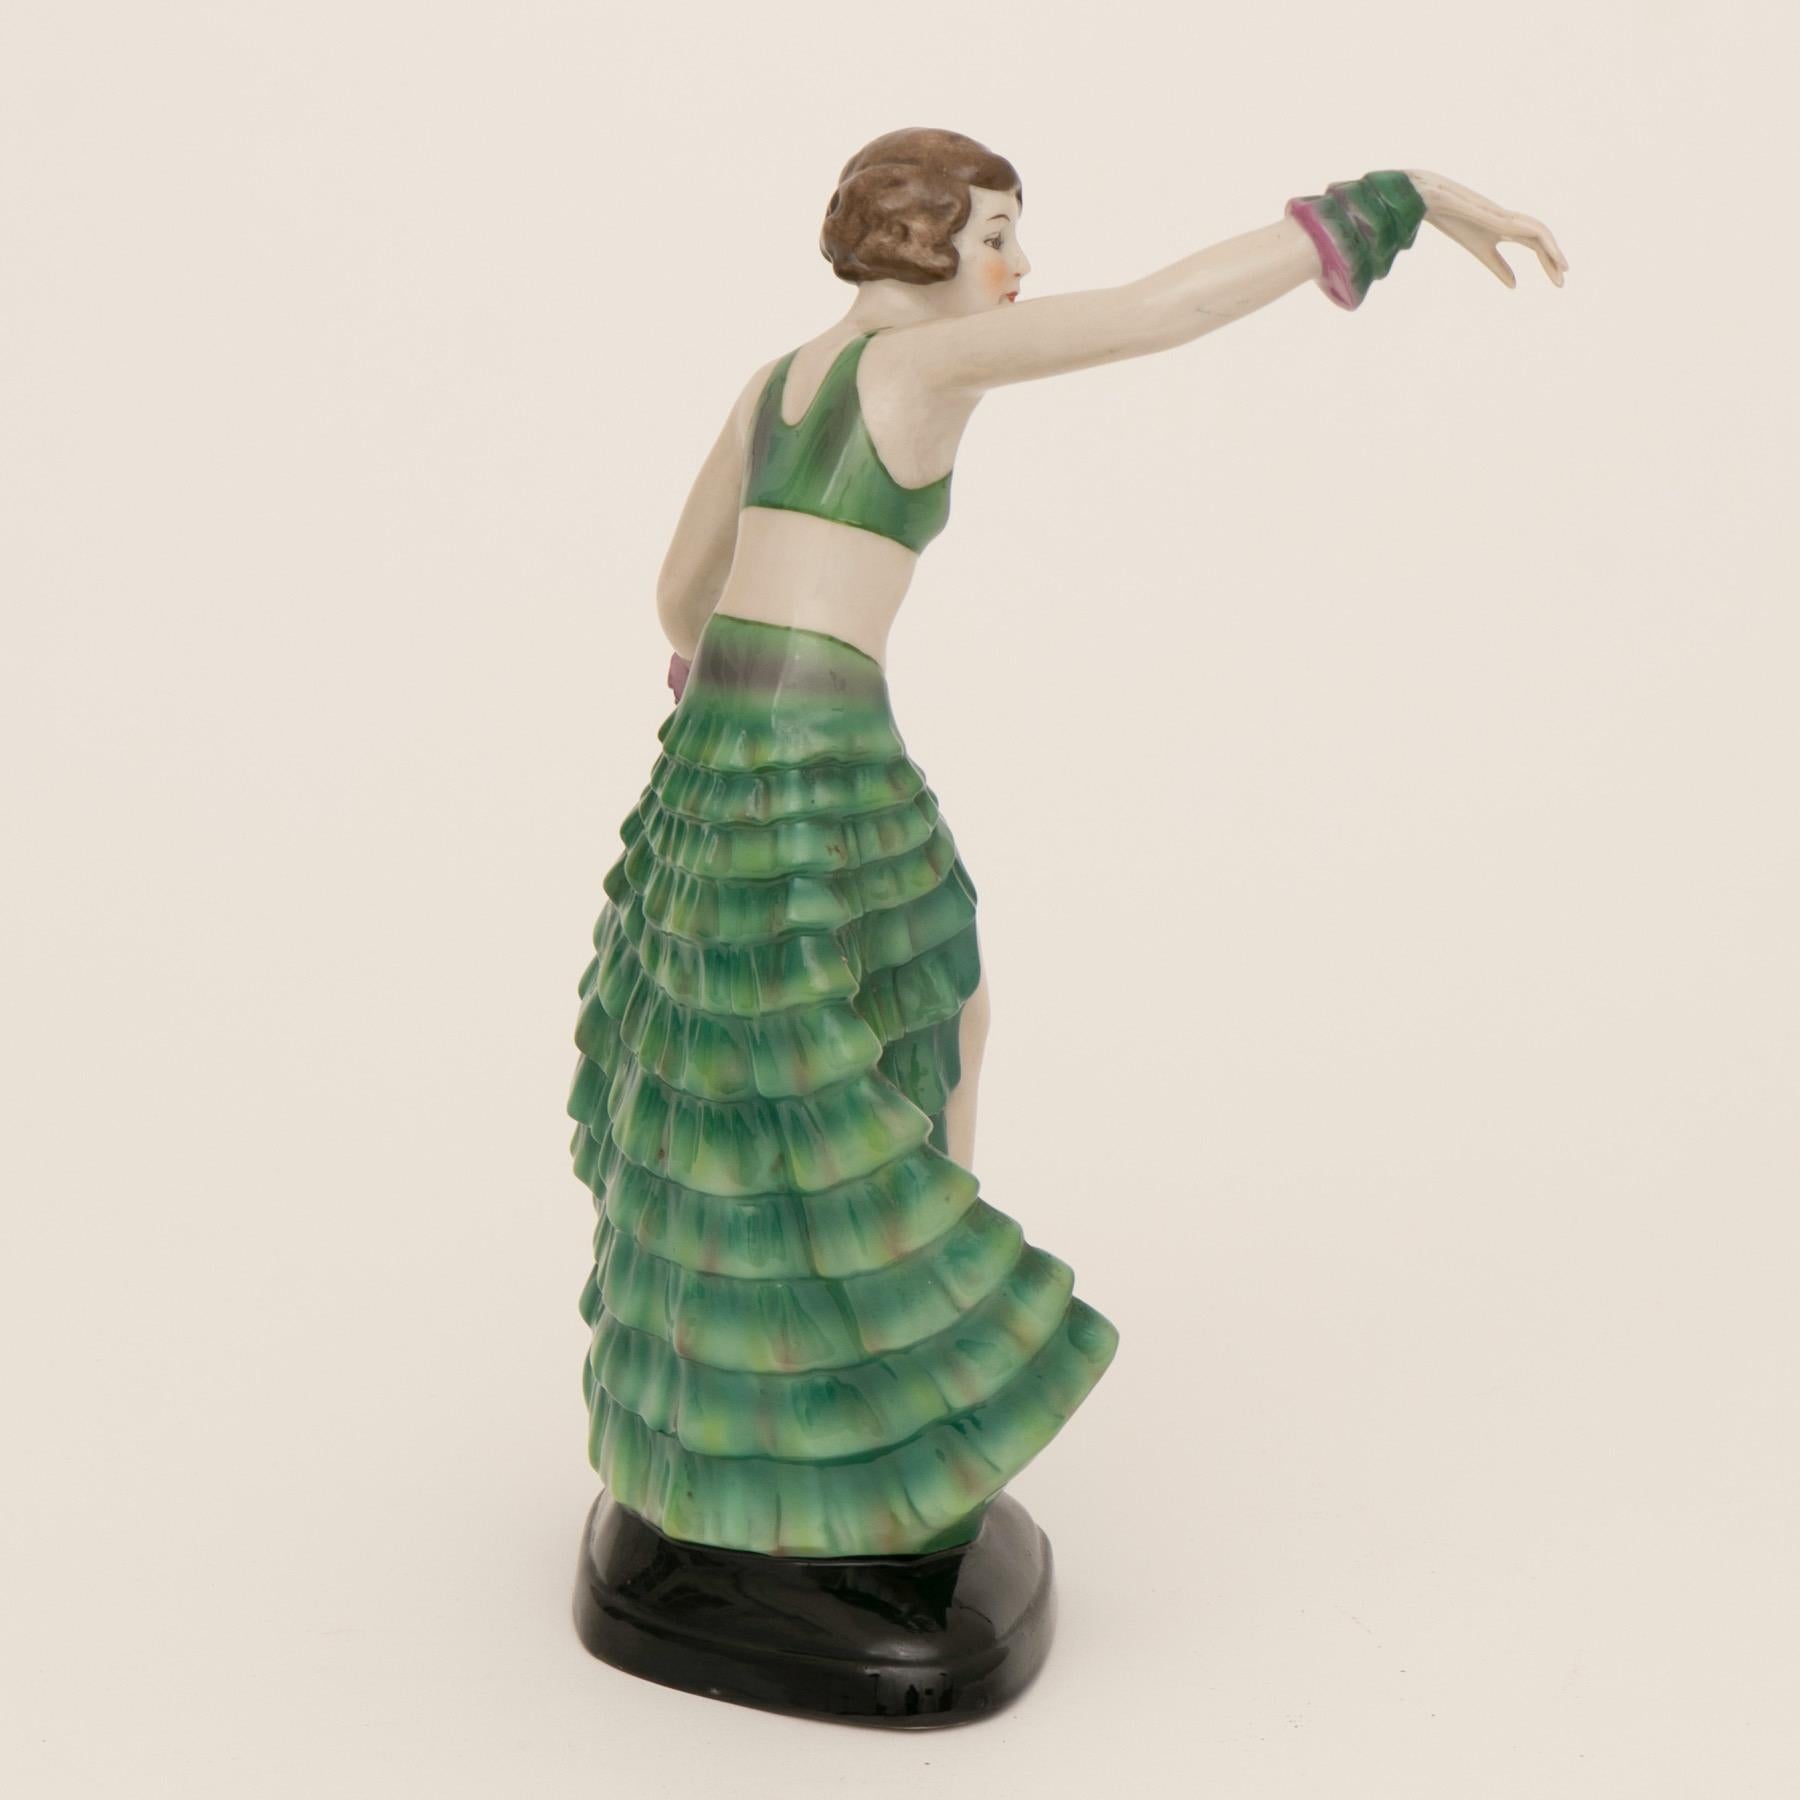 An Art Deco figure of a dancing woman in a green outfit by Fasold Stauch.
very elegant well proportioned figure
German, circa 1930.
Measures: H 26cm, W 13.5cm, D 15.5cm.